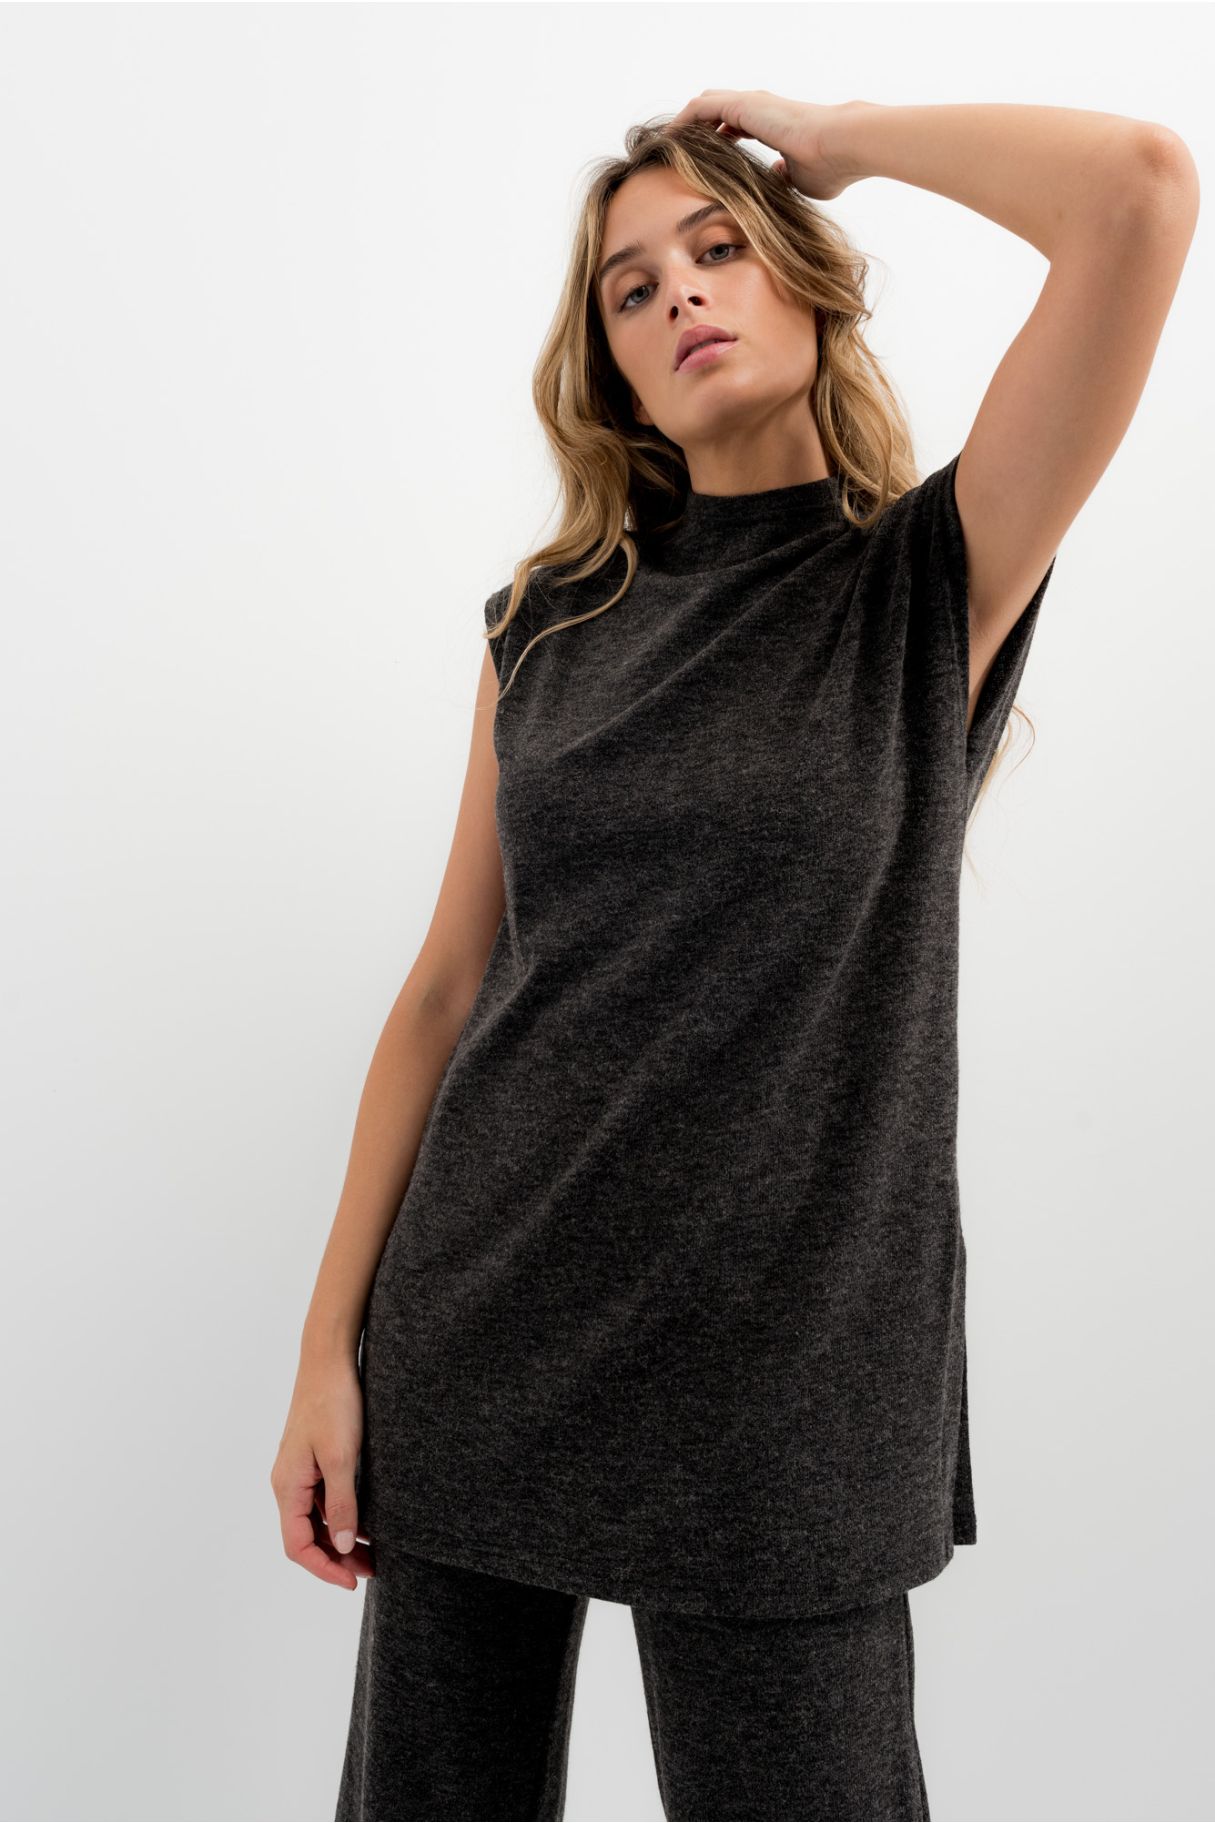 KNIT TUNIC-STYLE TOP WITH VENTS